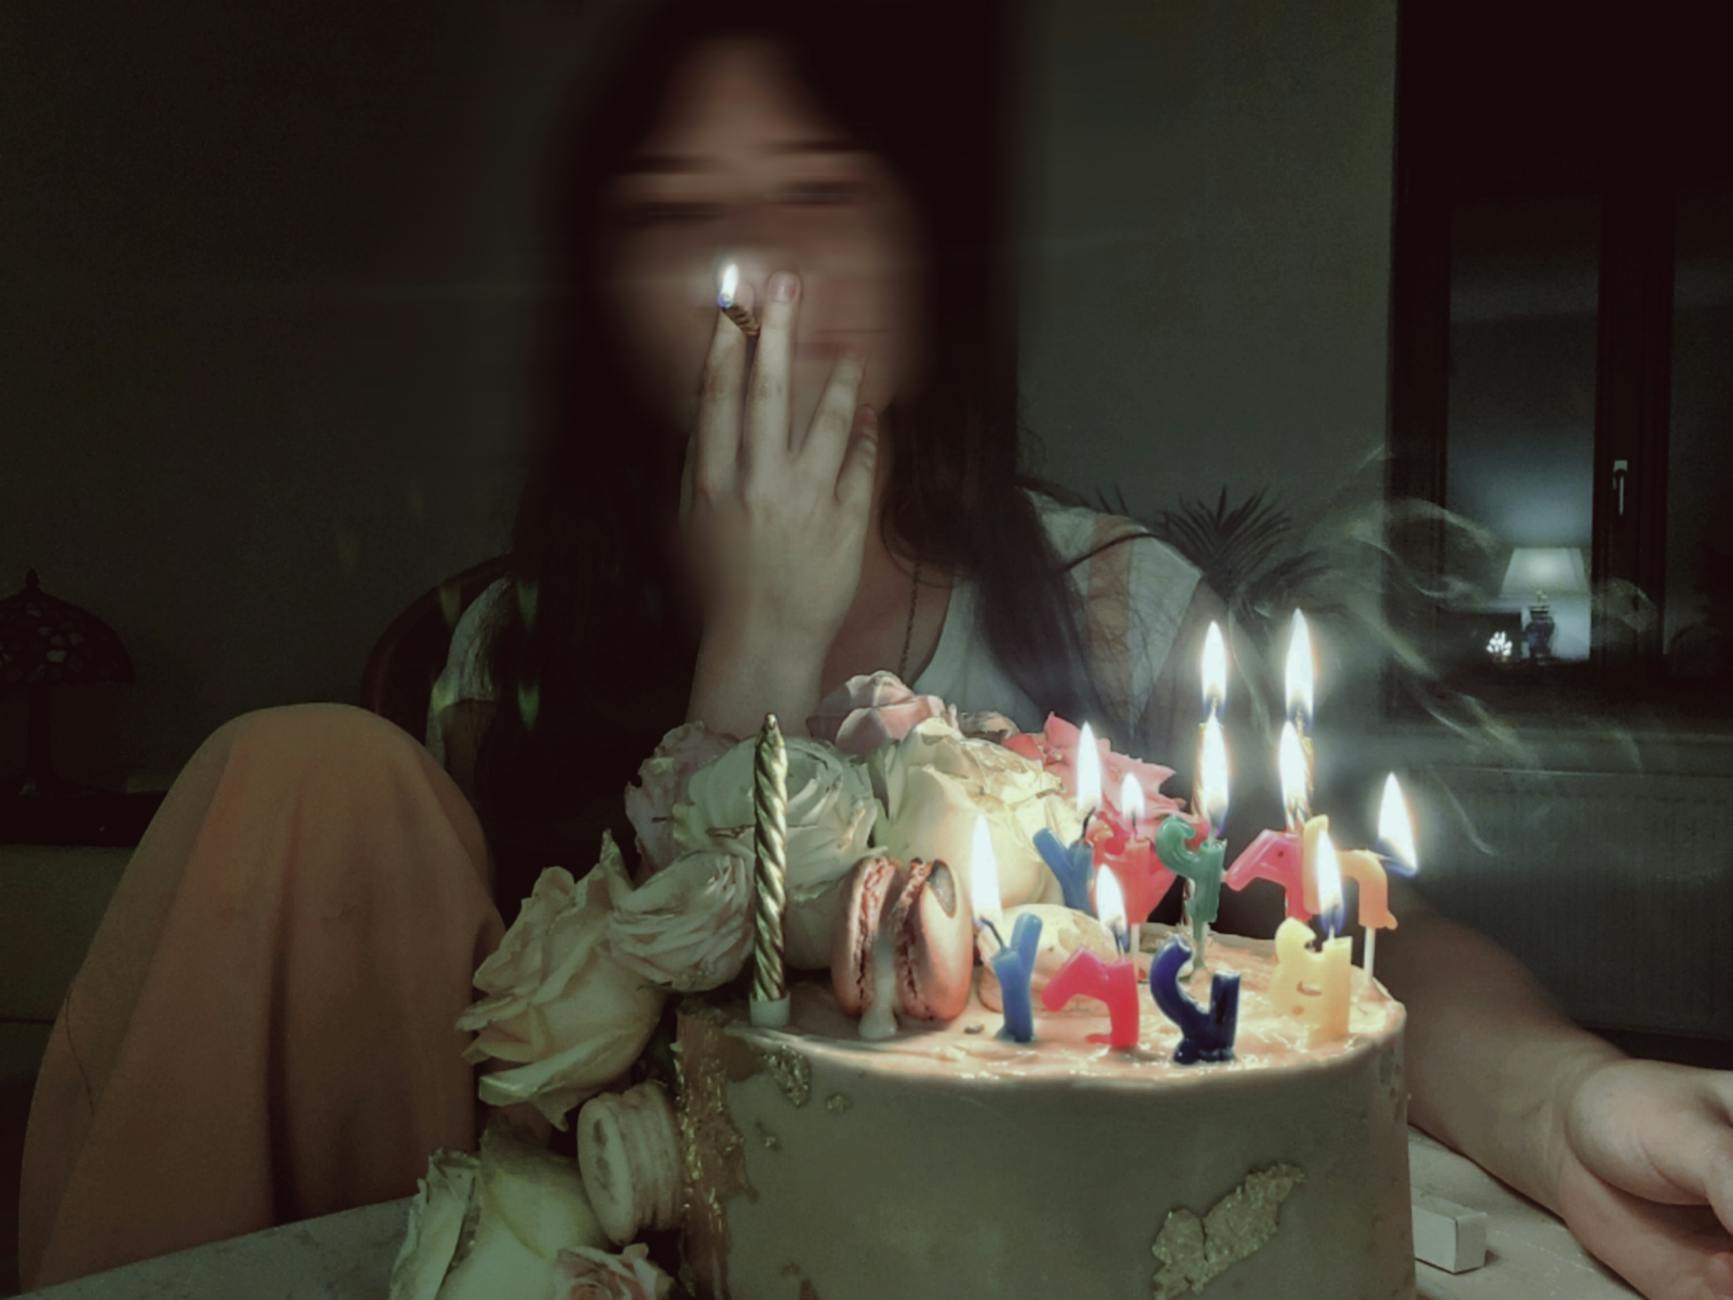 A woman sitting in front of a cake with candles